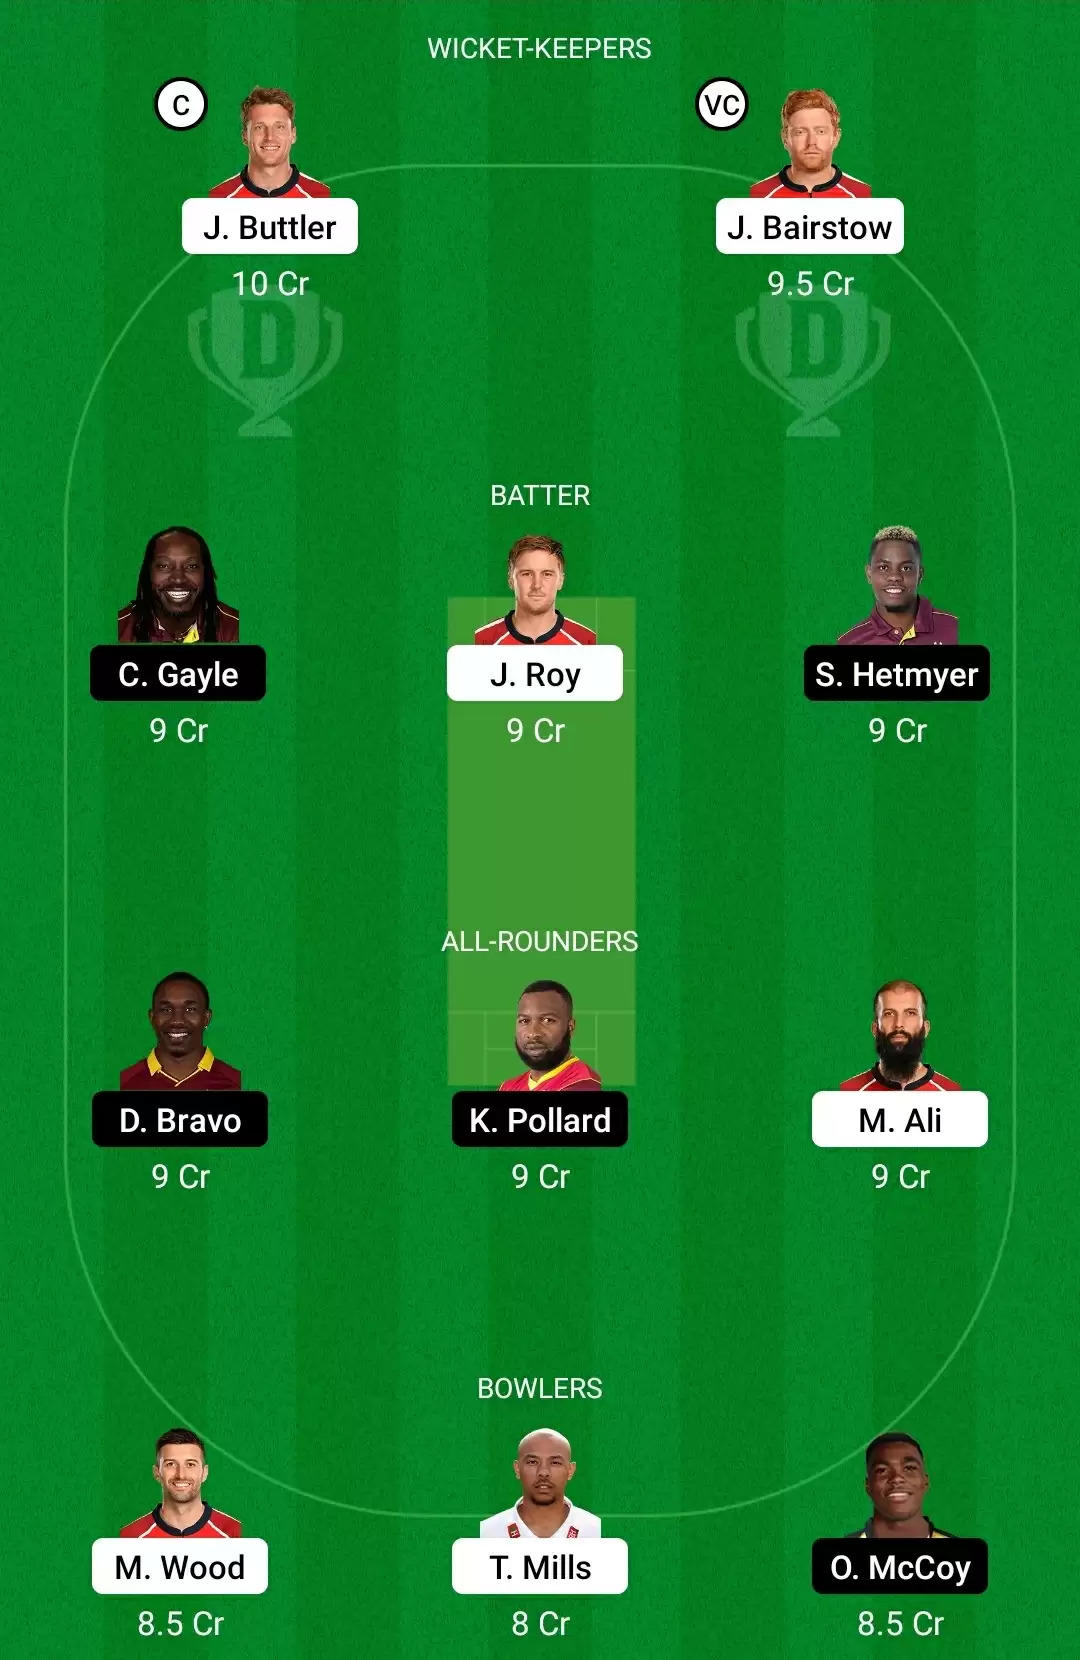 ENG vs WI Dream11 Prediction for T20 World Cup 2021: Playing XI, Fantasy Cricket Tips, Team, Weather Updates and Pitch Report